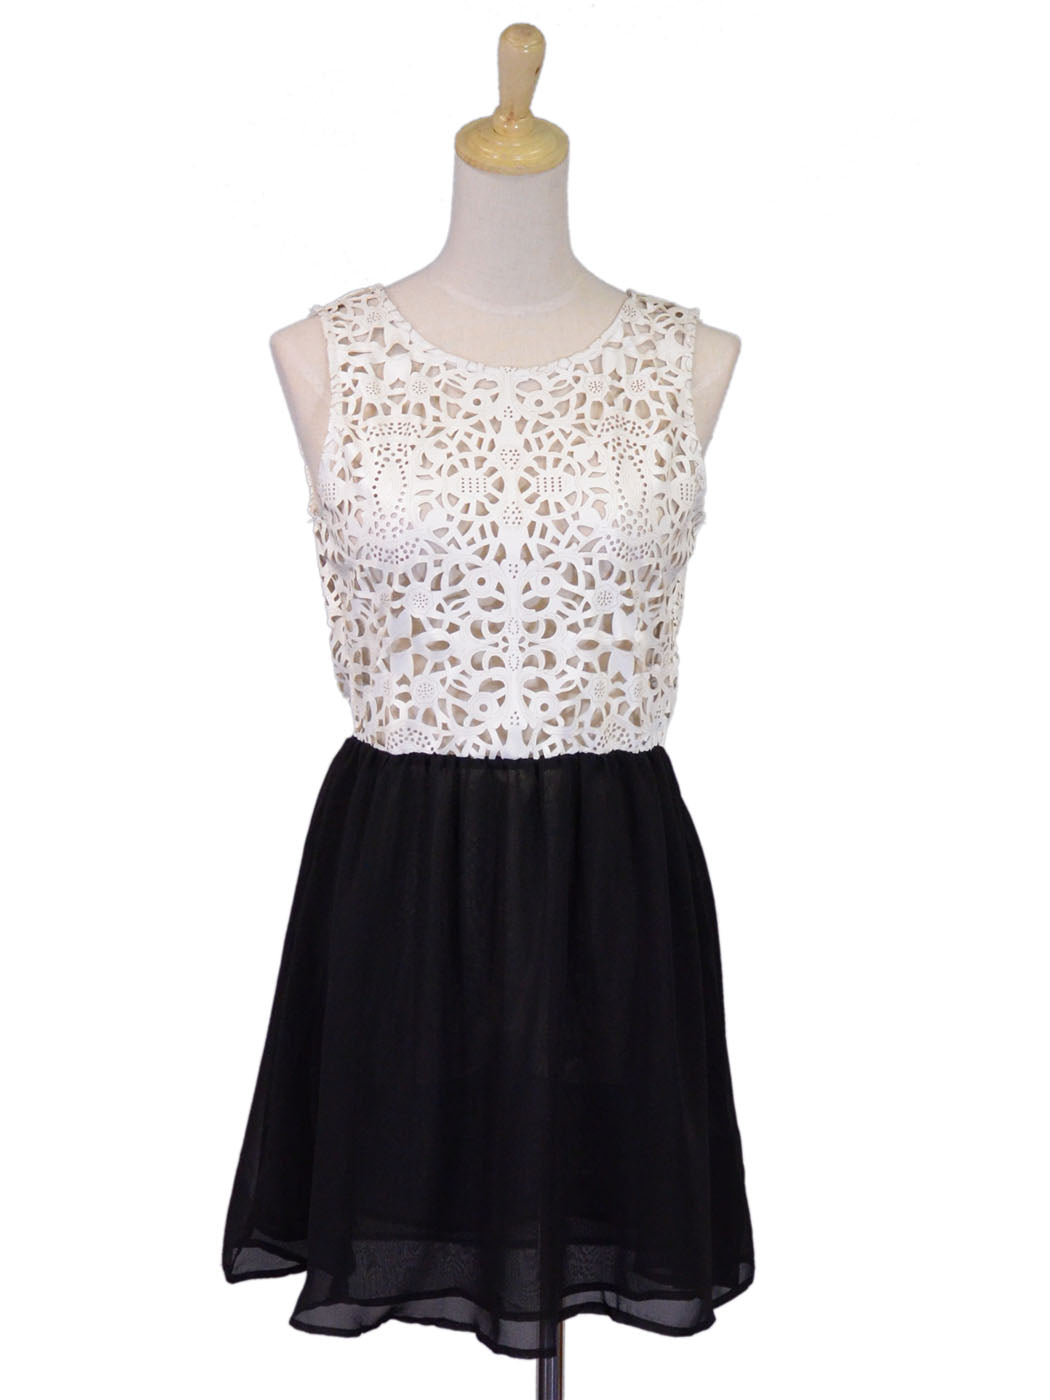 Glamorous Faux Leather Top Dress With Floral Laser Cutouts And Chiffon Skirt - ALILANG.COM